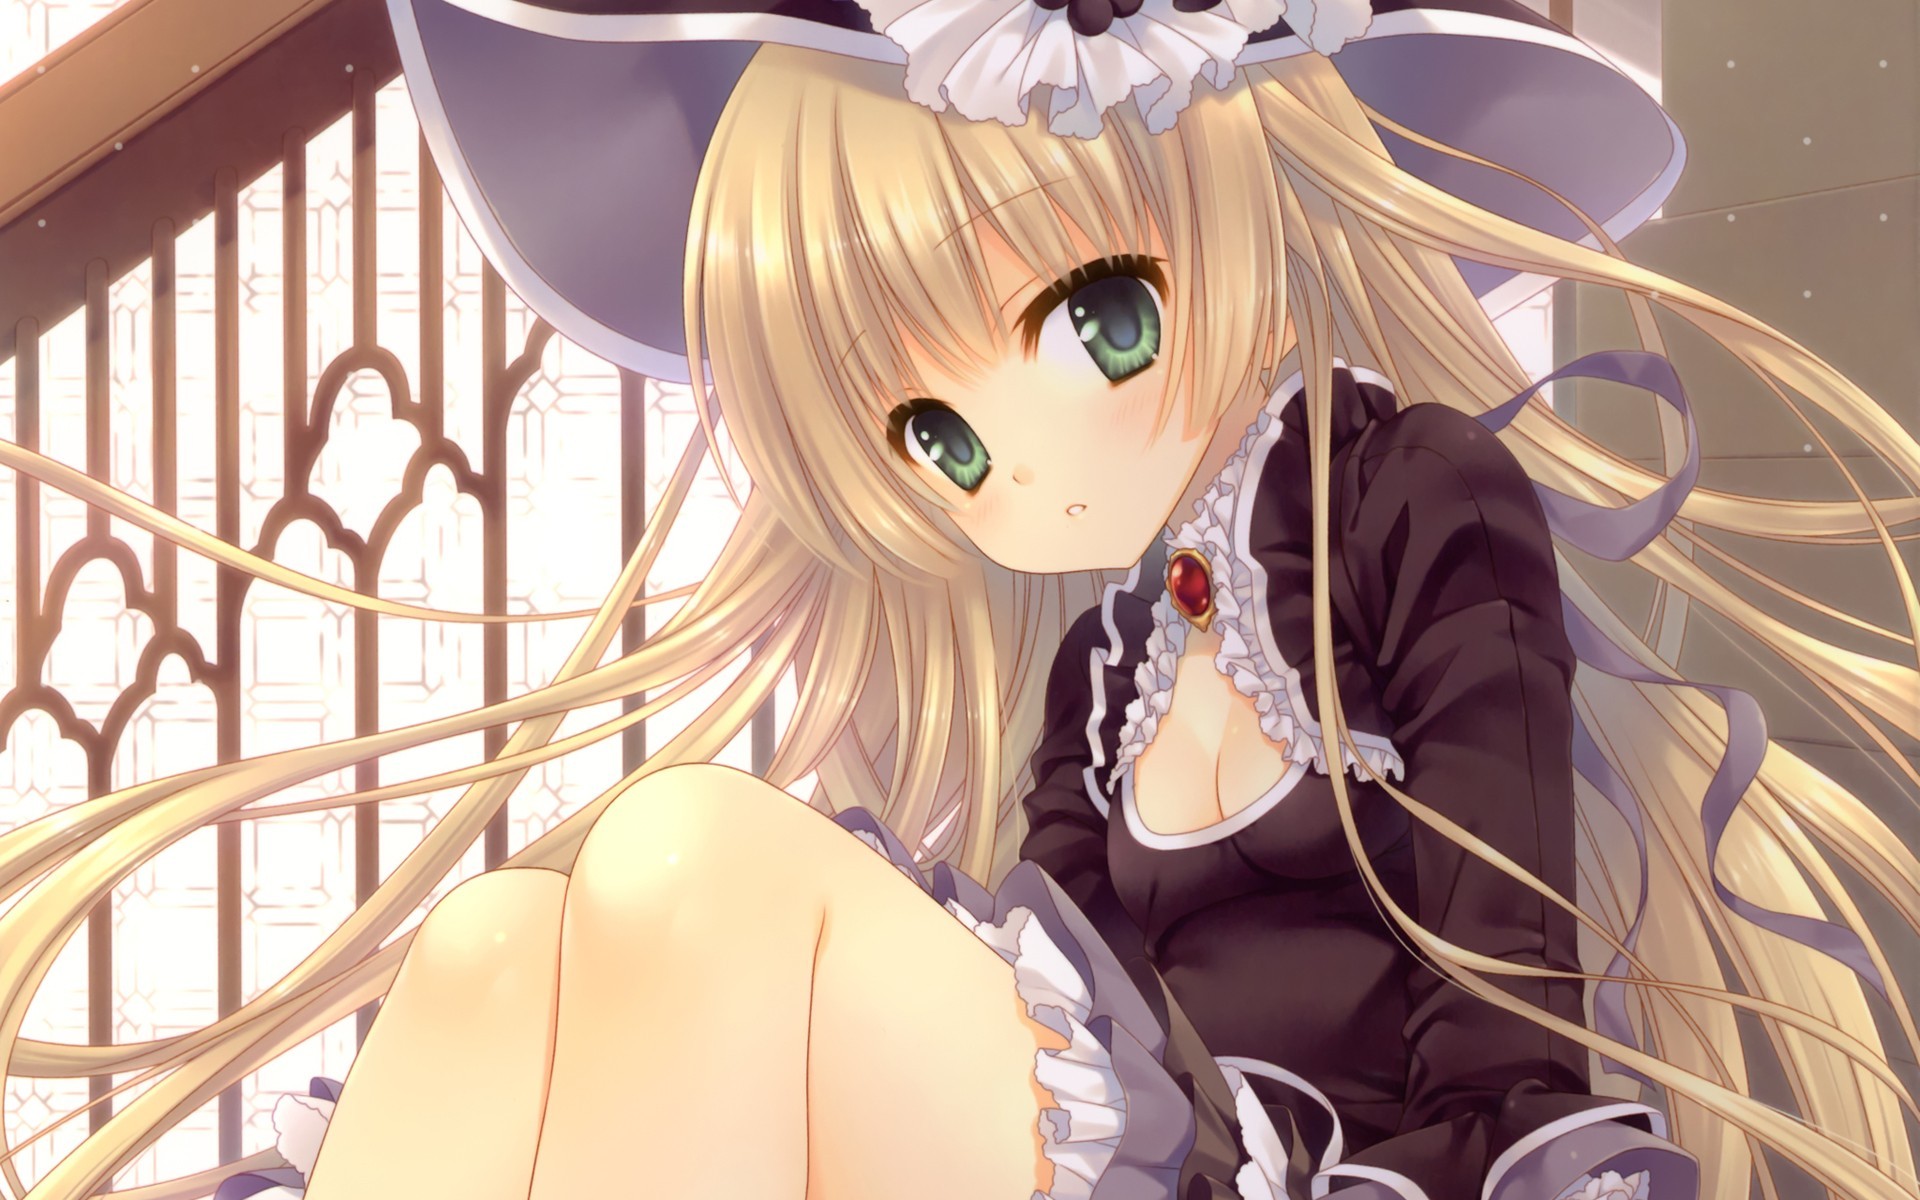 Anime 1920x1200 anime girls blonde Gosick anime green eyes looking at viewer hat women with hats boobs small boobs cleavage long hair